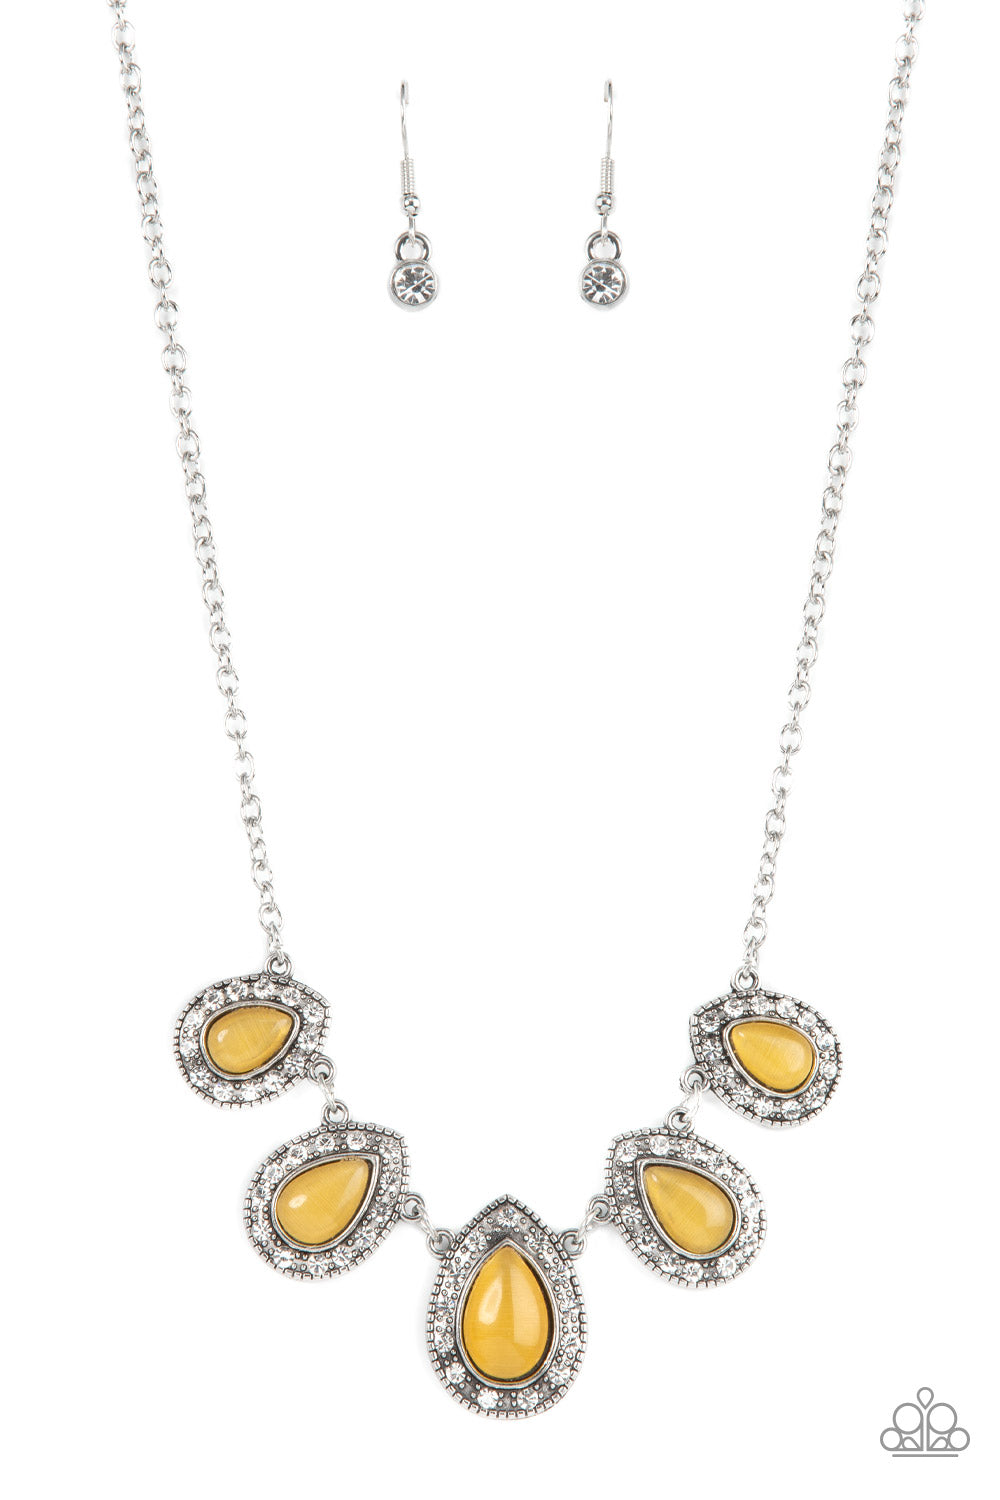 Everlasting Enchantment Paparazzi Accessories Necklace with Earrings